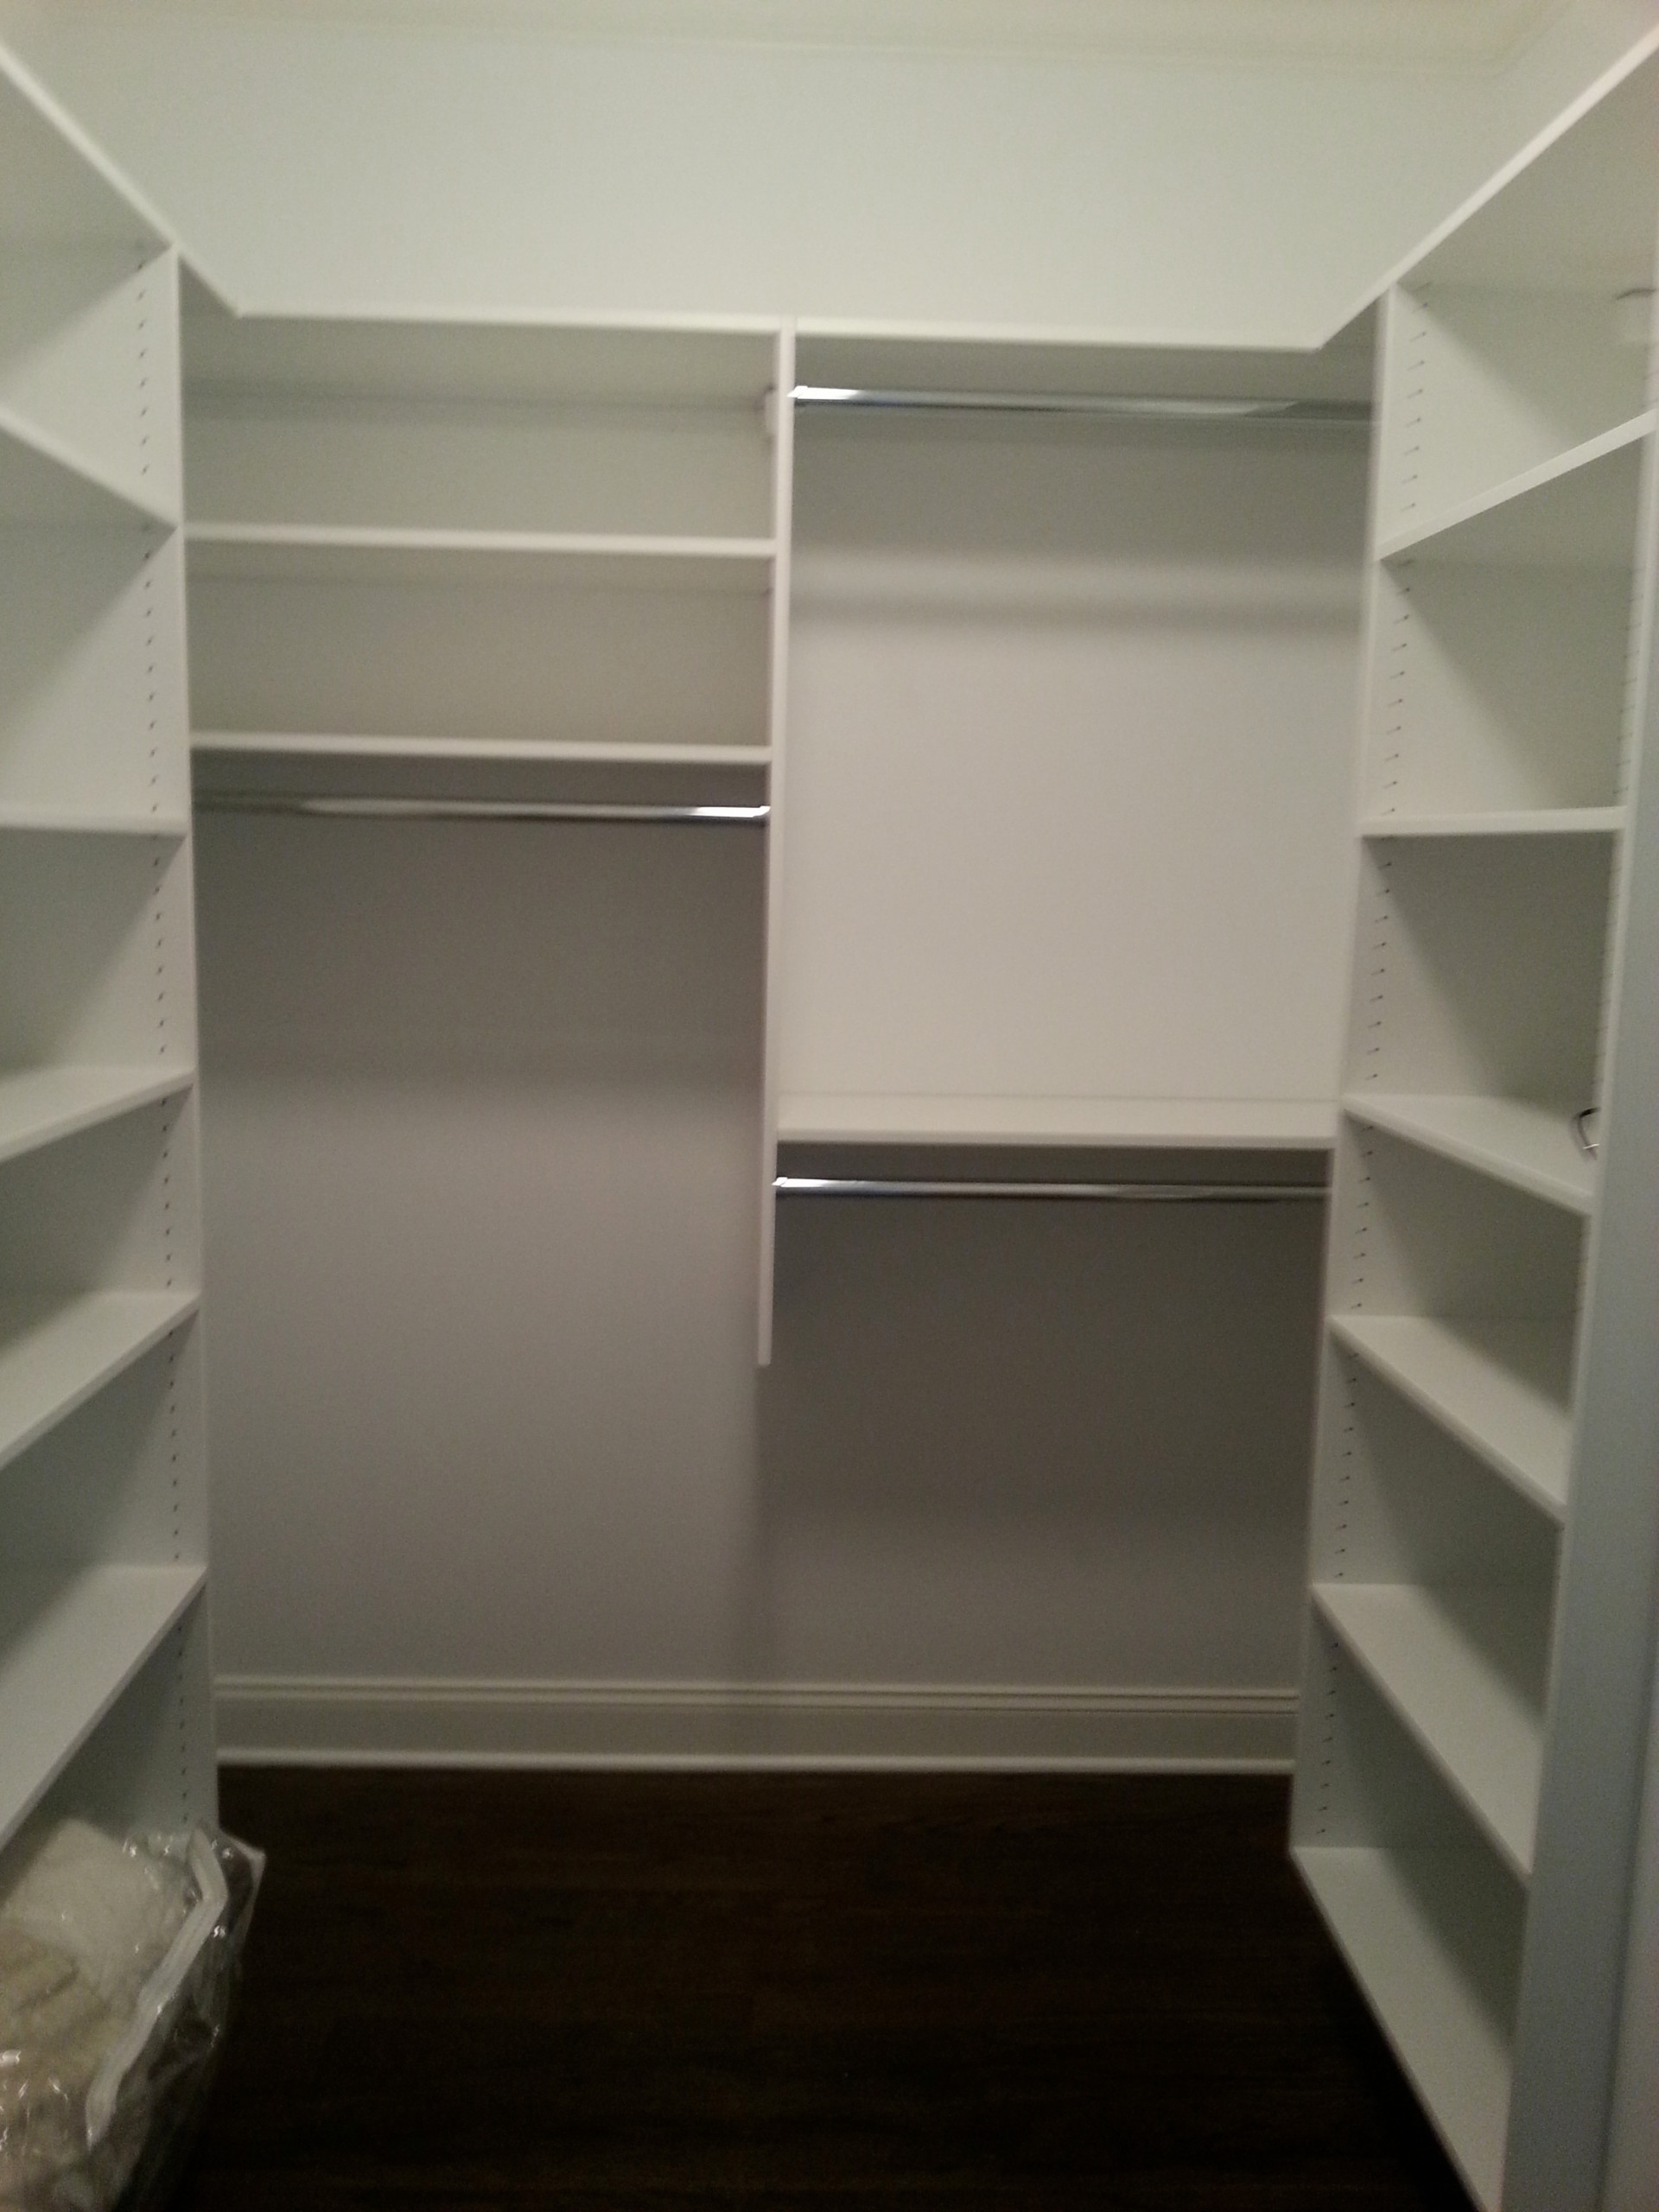 Dressing Rooms/Walk-In Closets